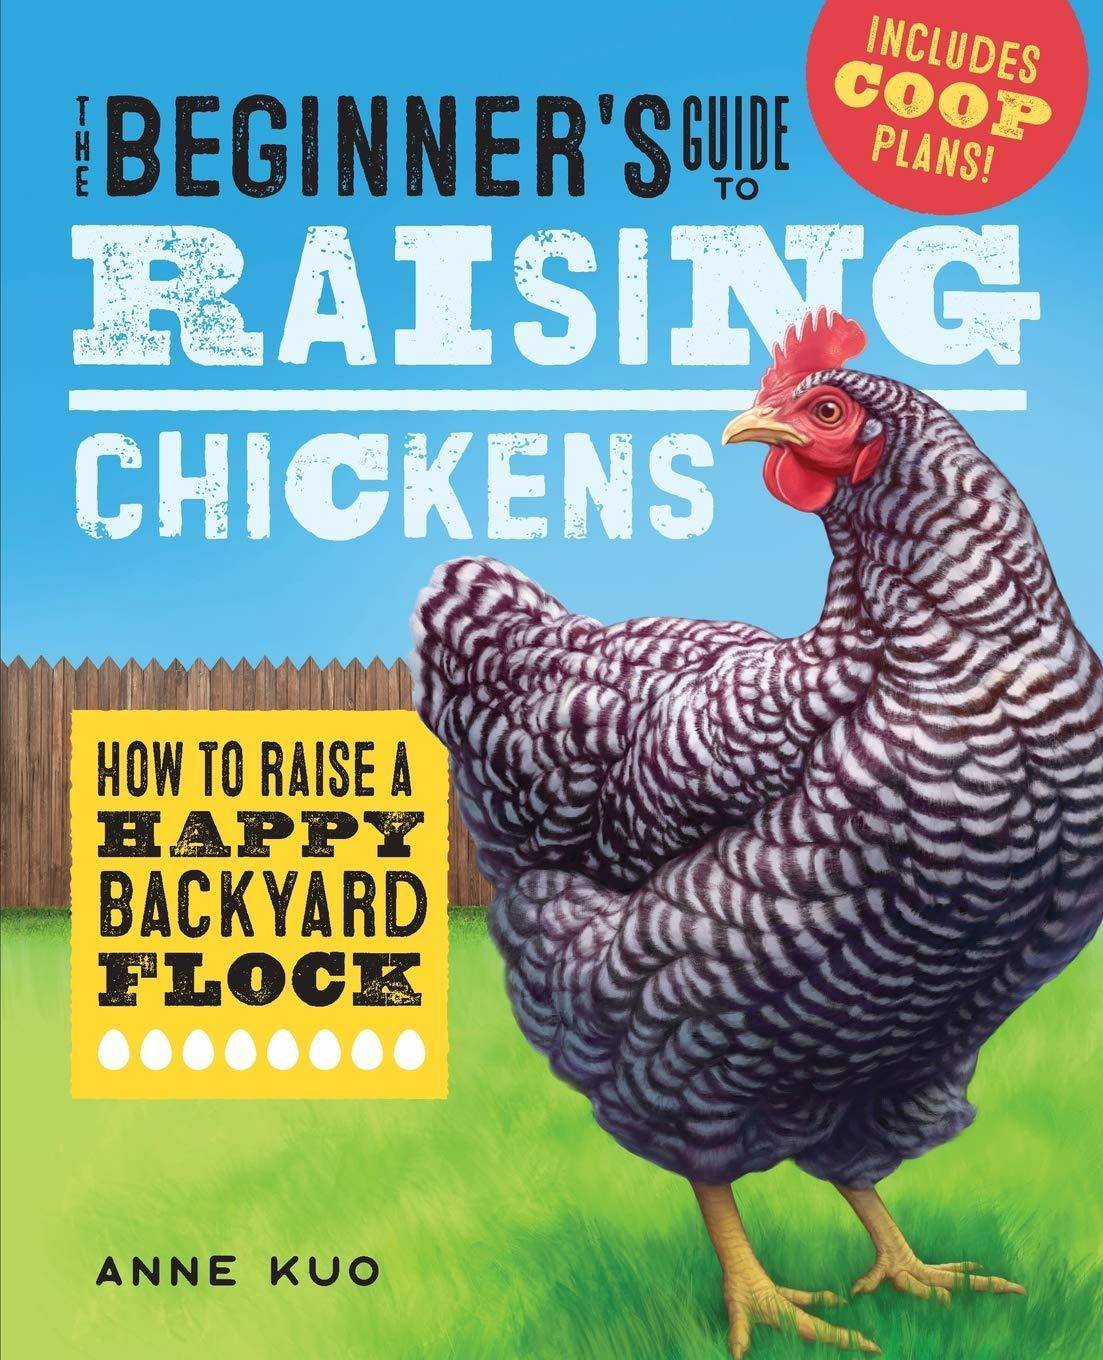 Beginner's Guide to Raising Chickens: How to Raise a Happy Backy - SureShot Books Publishing LLC